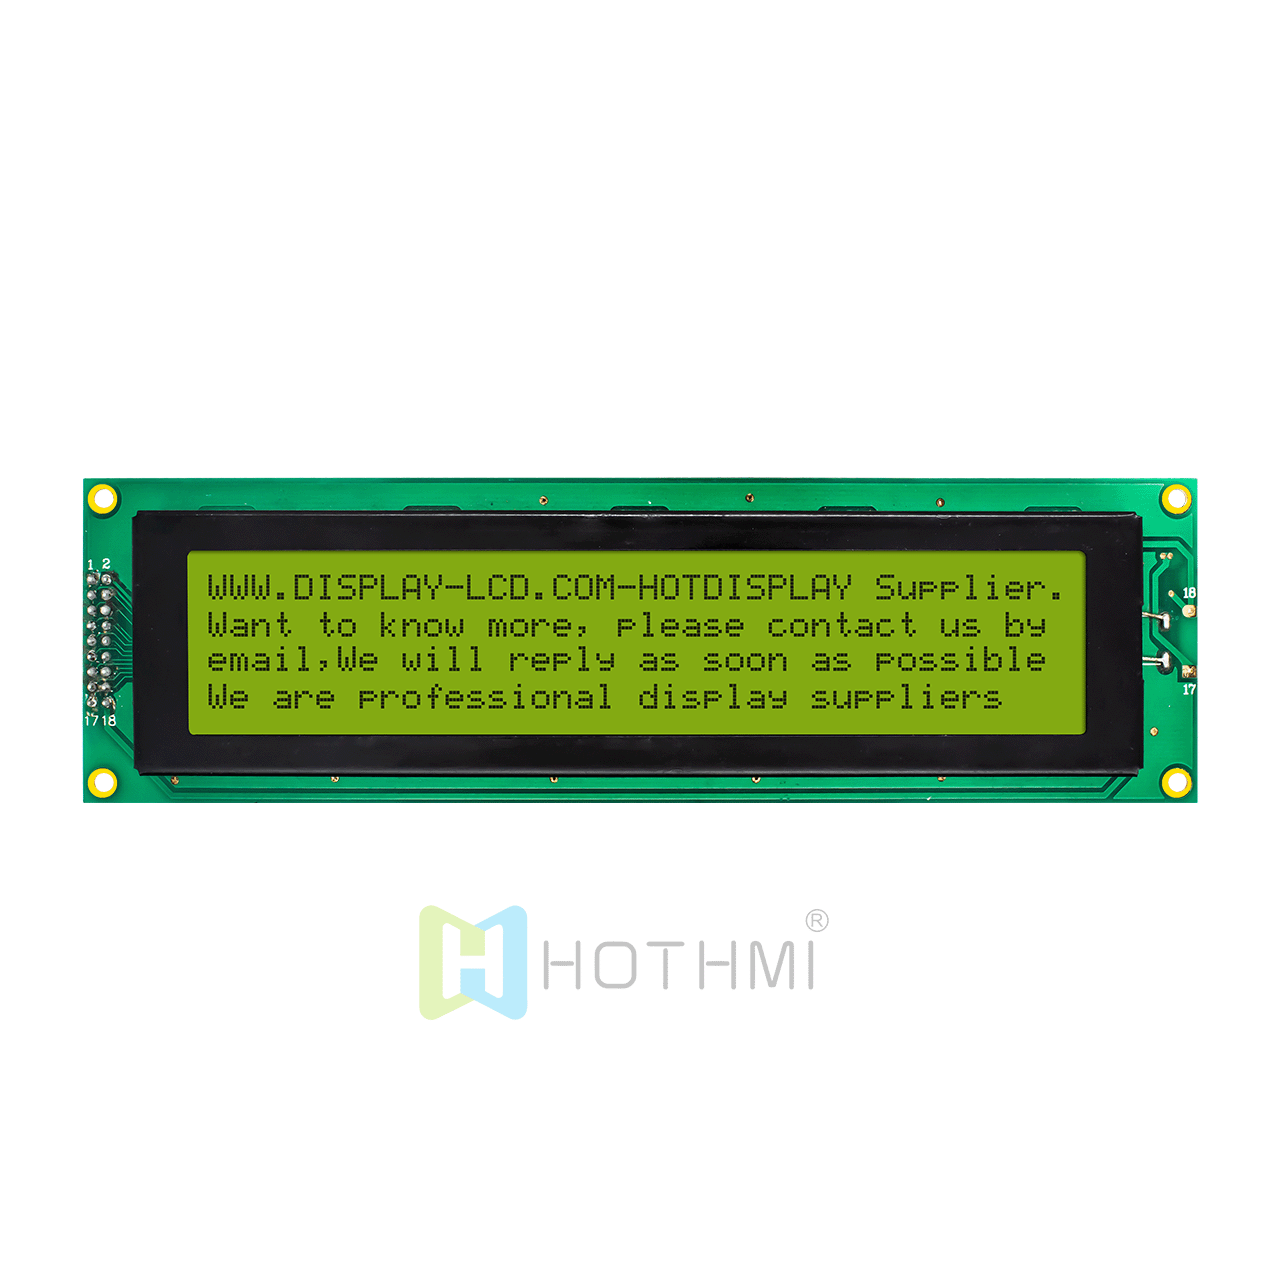 5.0v | 4X40 character monochrome LCD display module | STN positive display | with yellow-green backlight | Arduino display | ST7066U controller